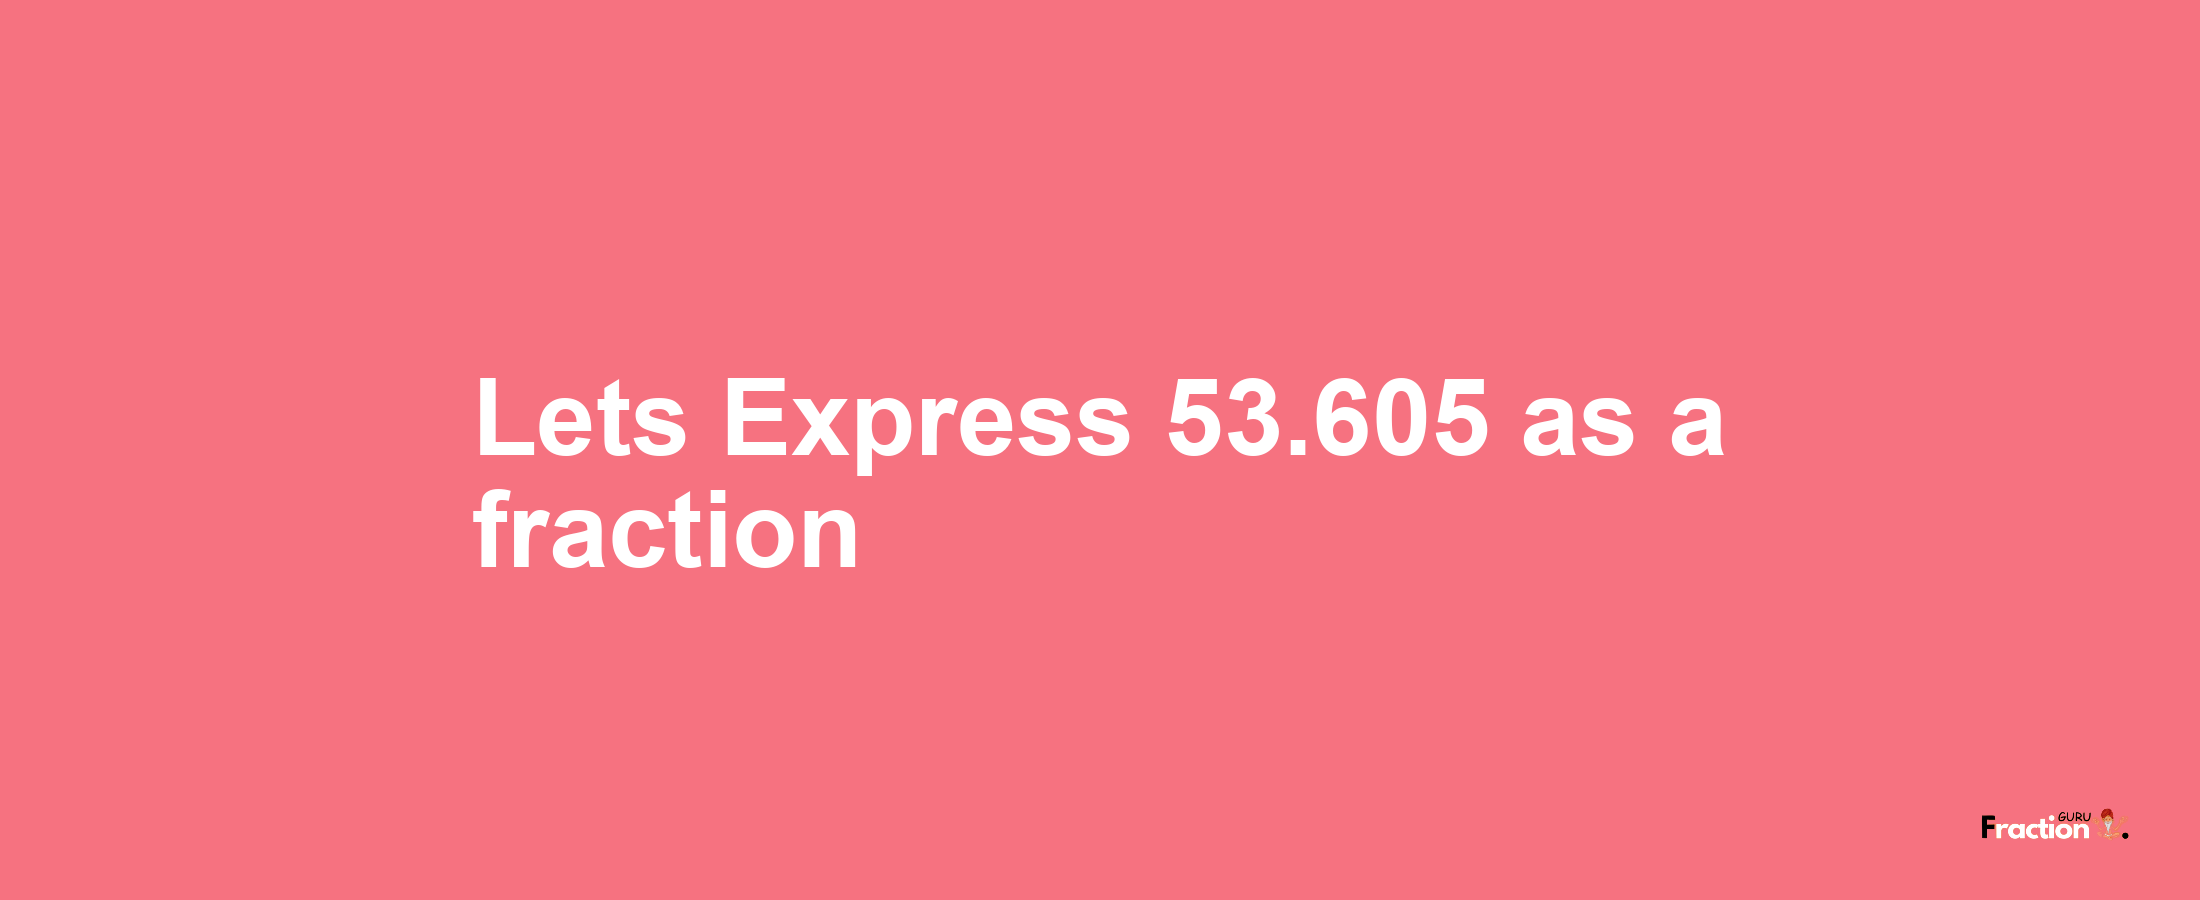 Lets Express 53.605 as afraction